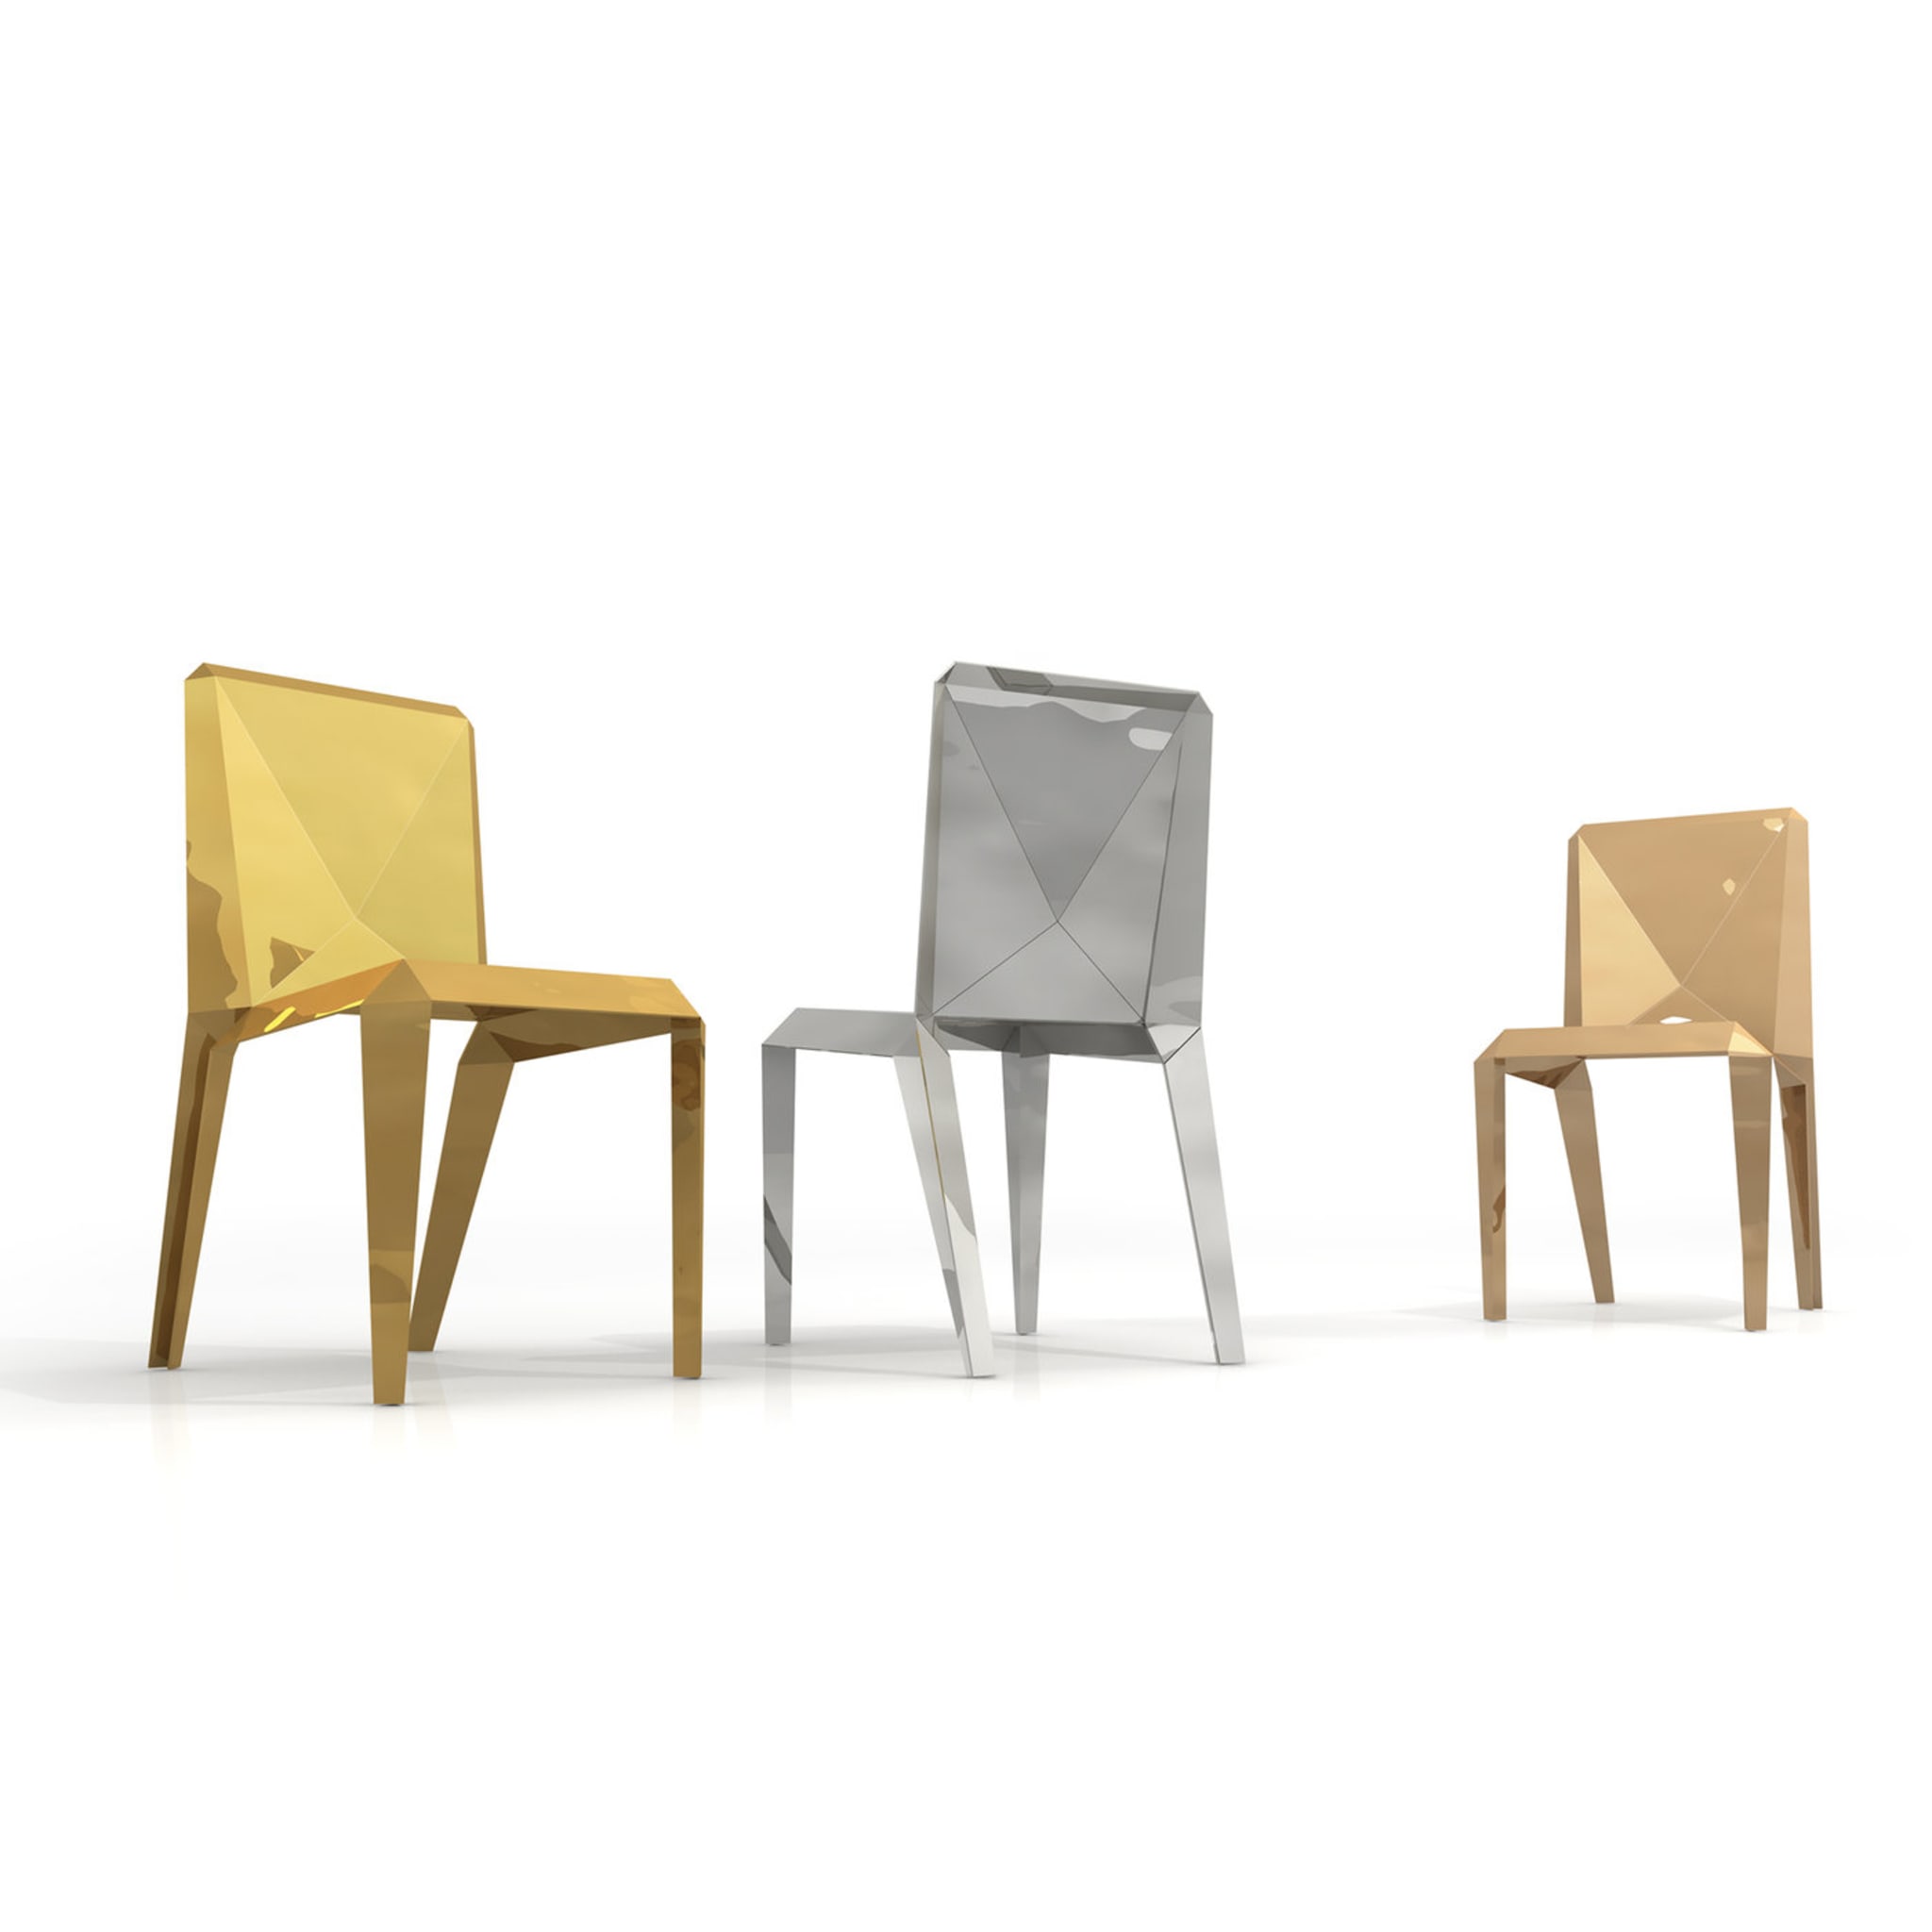 Lingotto Gold Chair by Garilab by Piter Perbellini - Alternative view 1